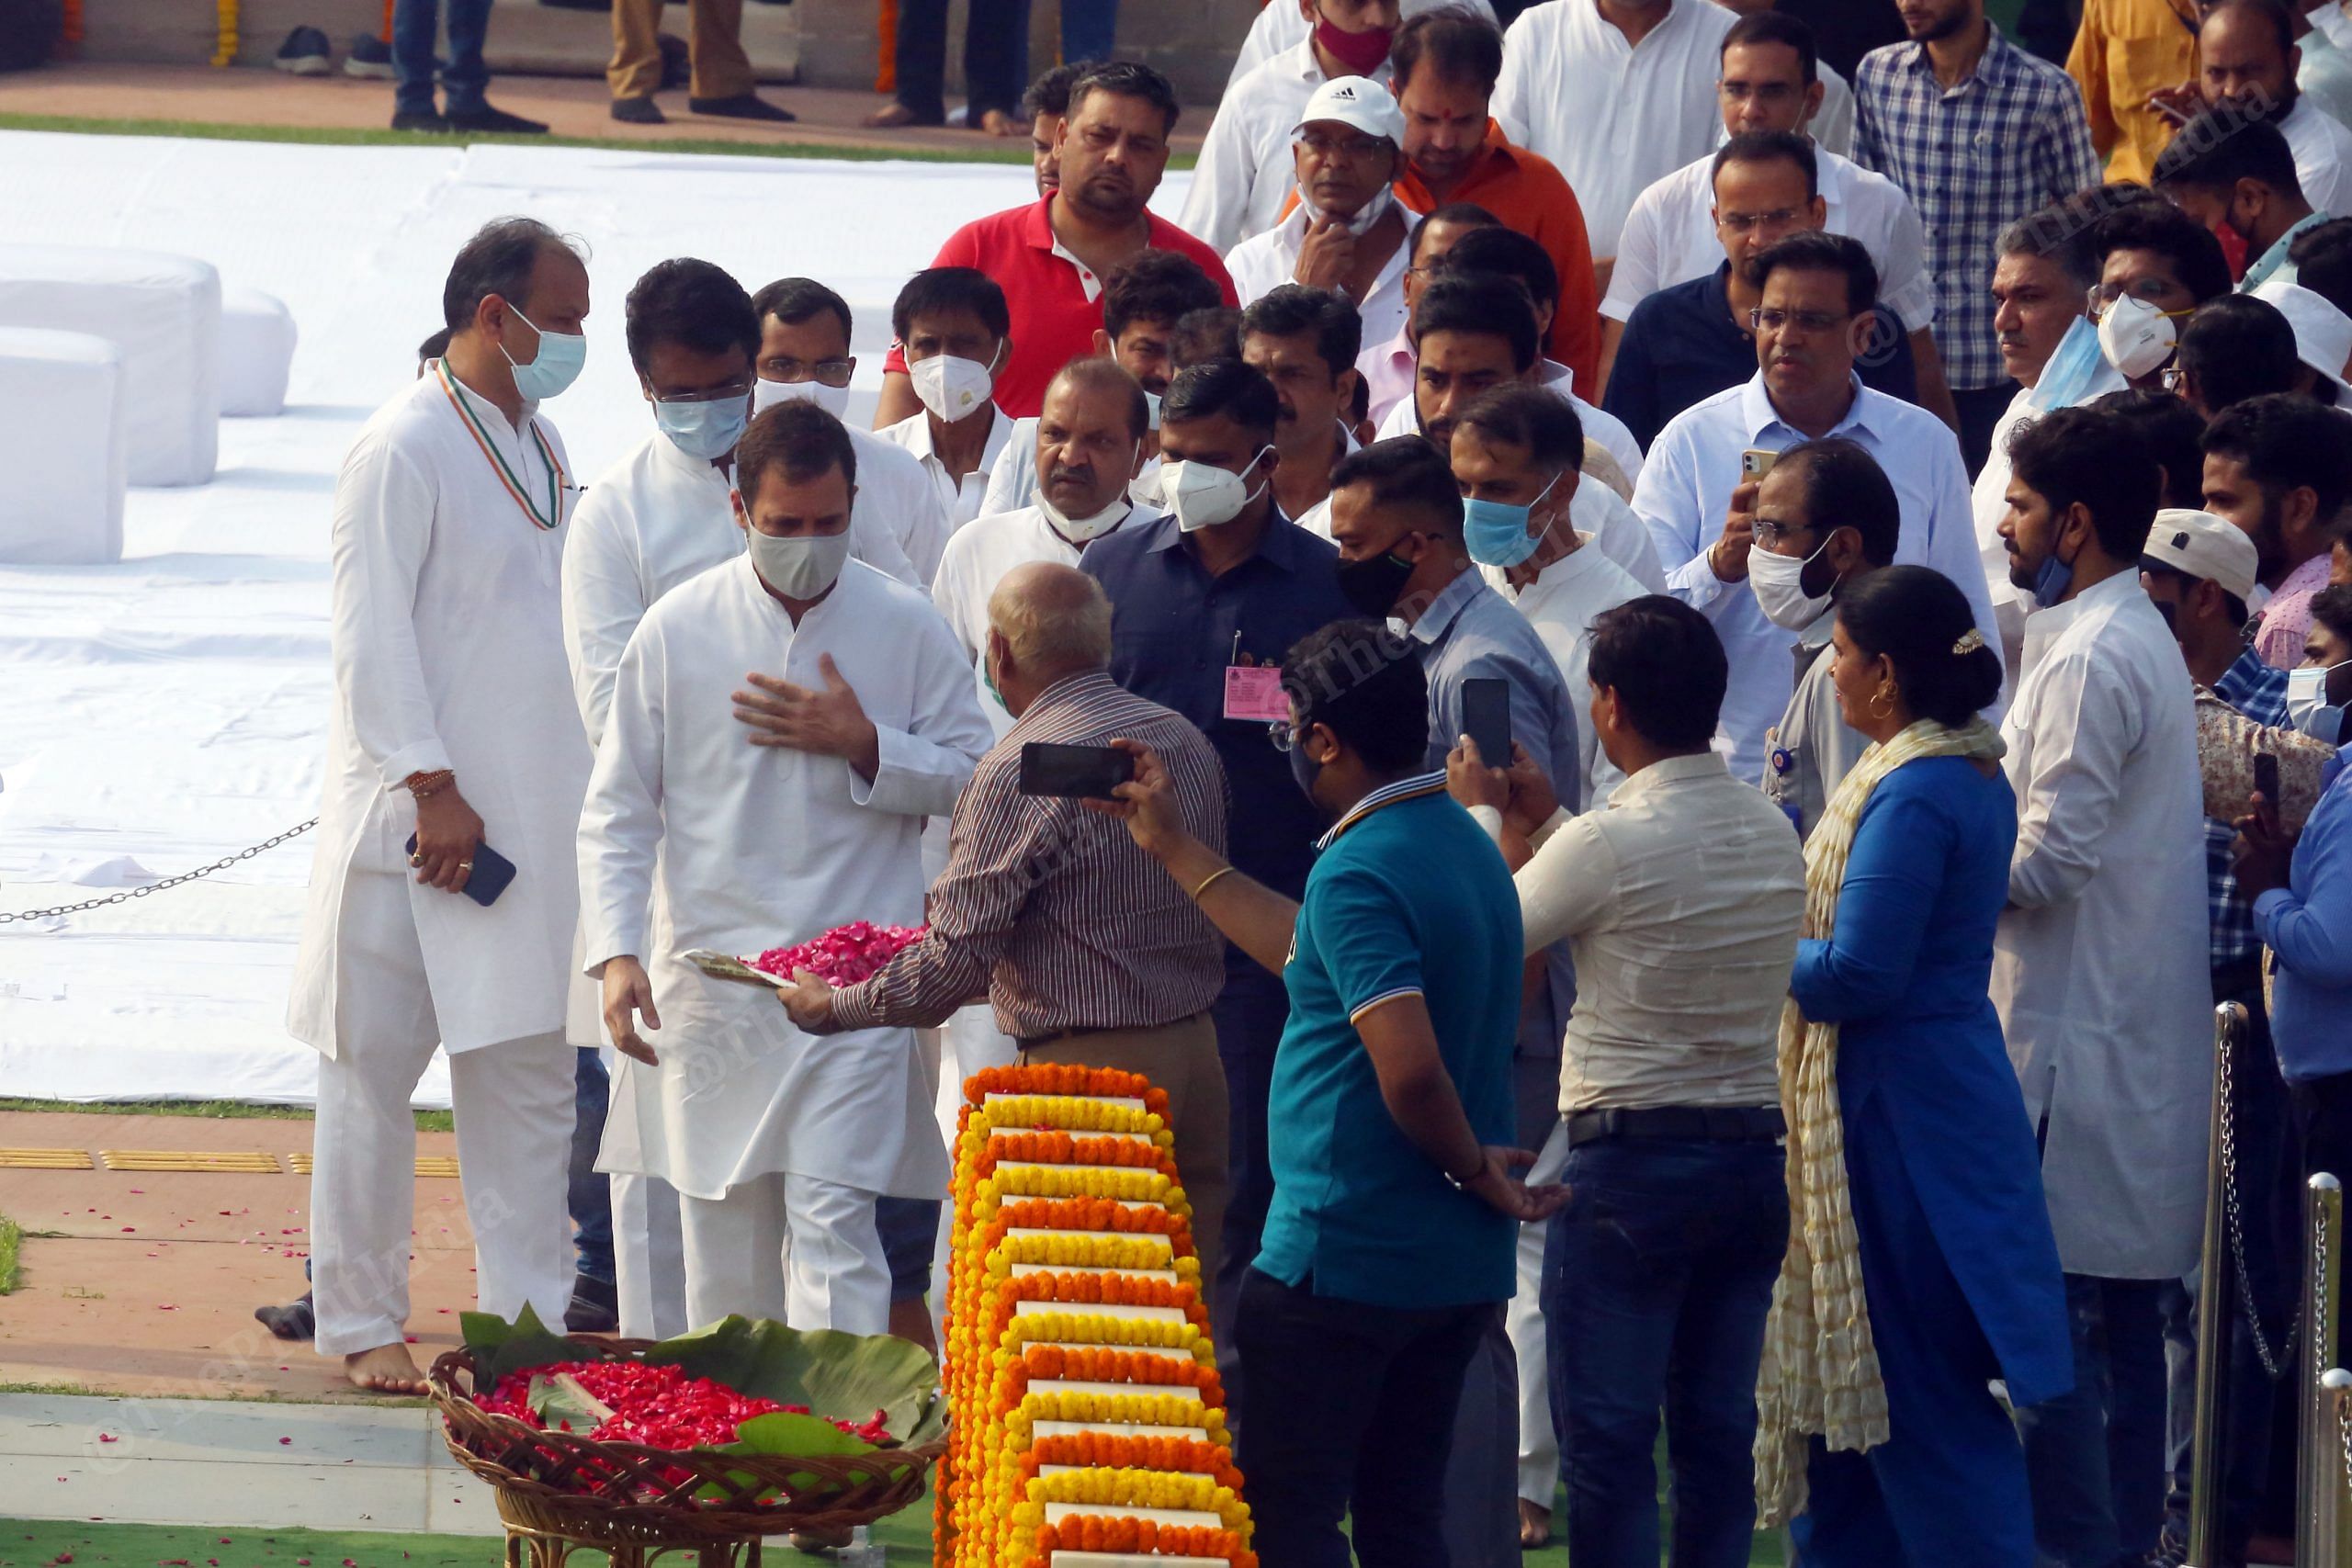 Congress leader Rahul Gandhi arrives at Raj Ghat to pay homage to Mahatma Gandhi on the occasion of his birth anniversary in New Delhi | Photo: Praveen Jain | ThePrint